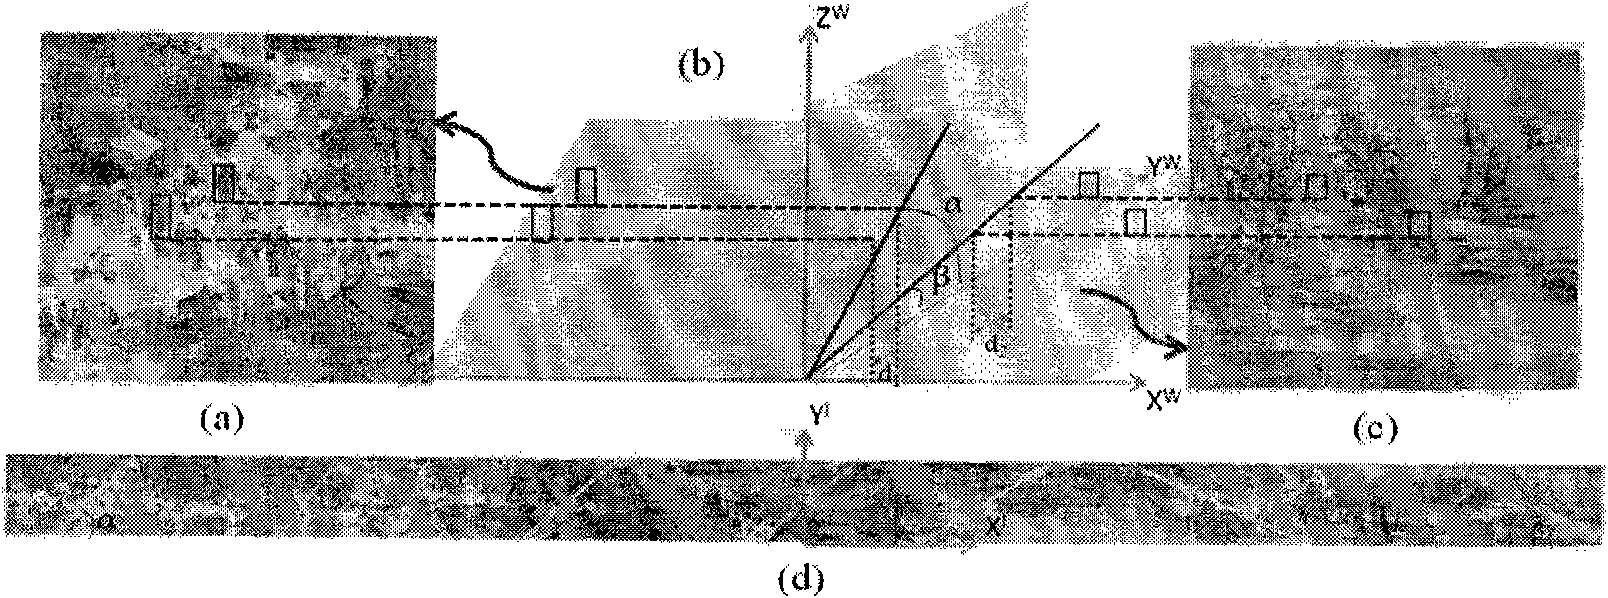 Method and system for computing three-dimensional space layout based on scattered perspective image